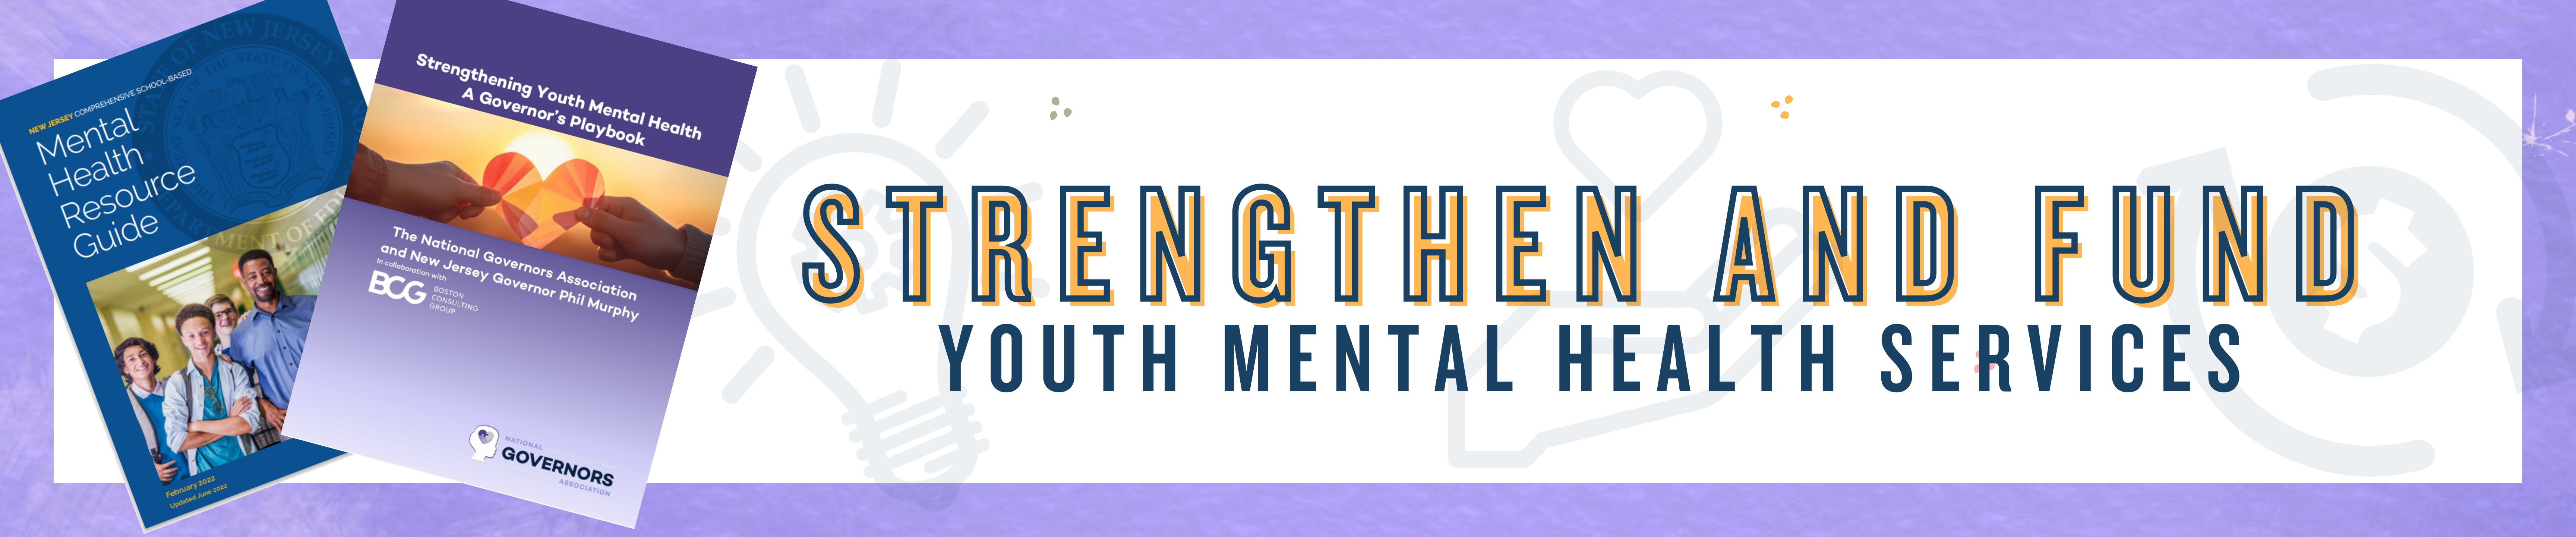 Strengthen and fund youth mental health services. Two book covers are shown: Mental Health Resource Guide and Strenghtening Youth Mental Health A Governor's Playbook.